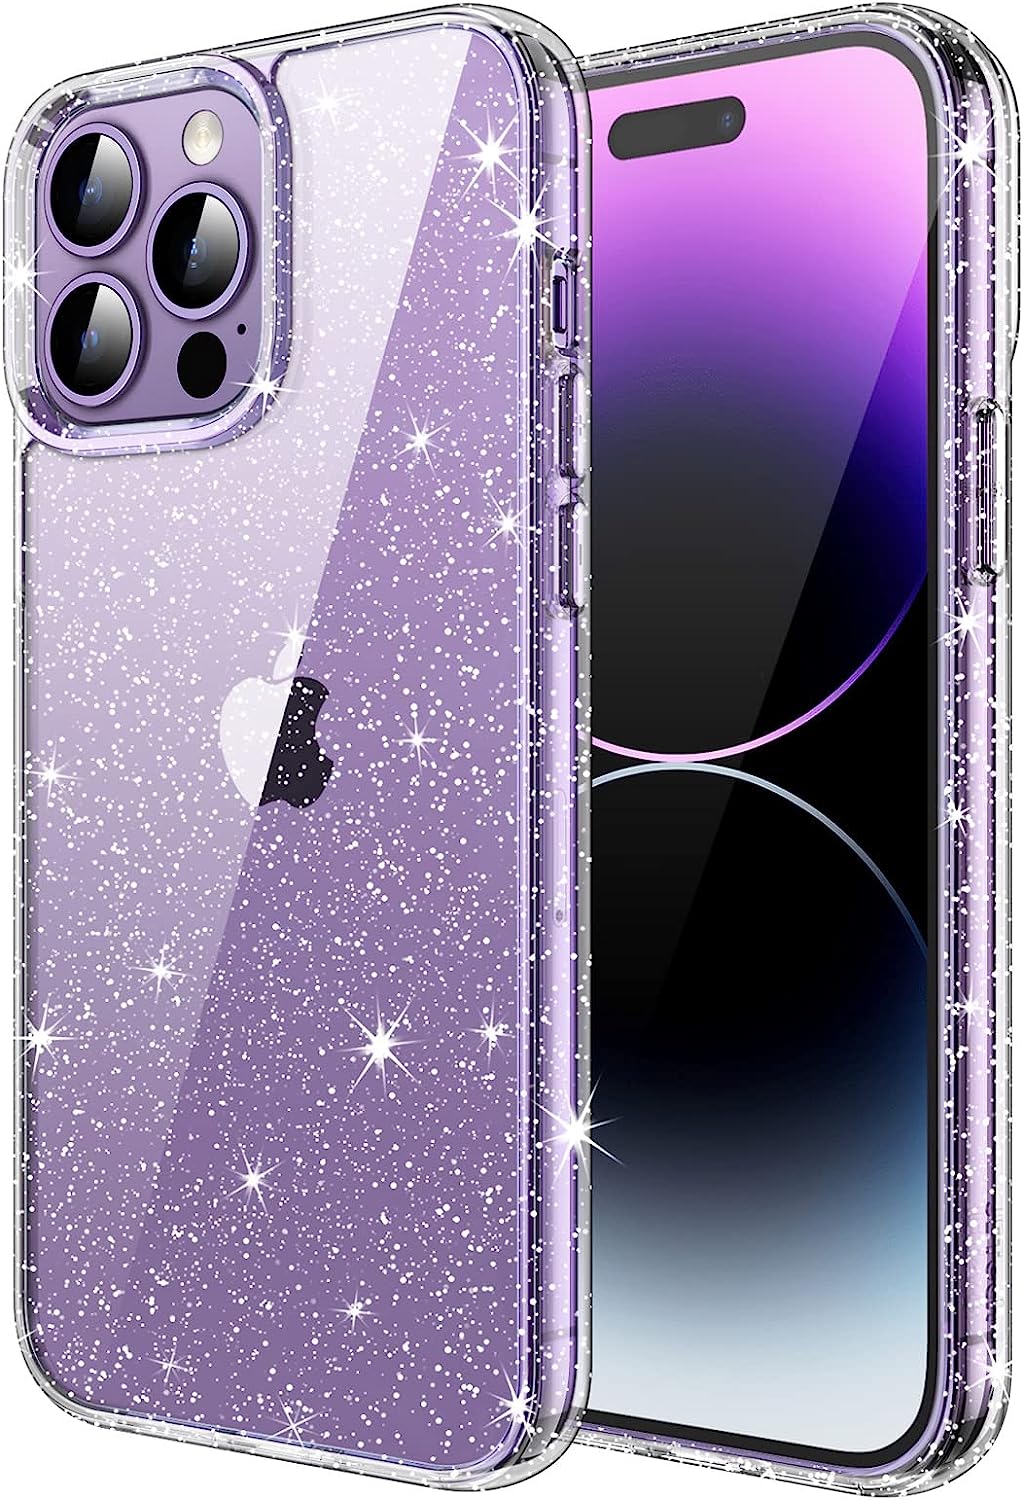 IPhone 14 Pro Case Designed by JETech Glitter - Clear